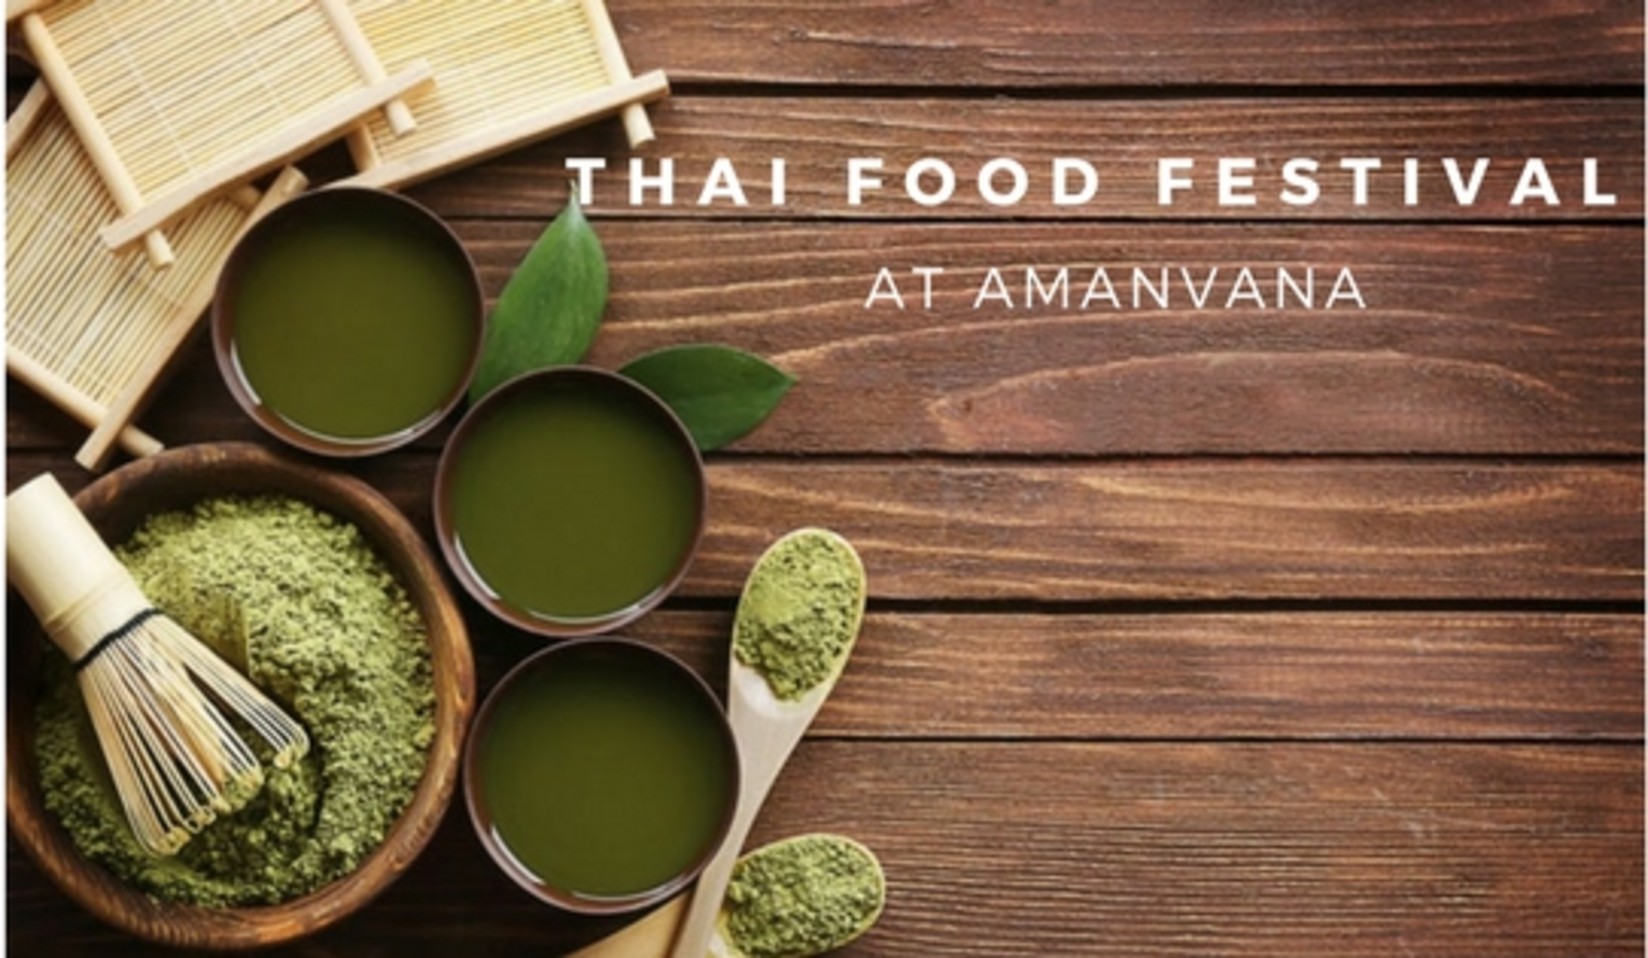 Promotional image for a Thai Food Festival with bowls of green spices and sauces.